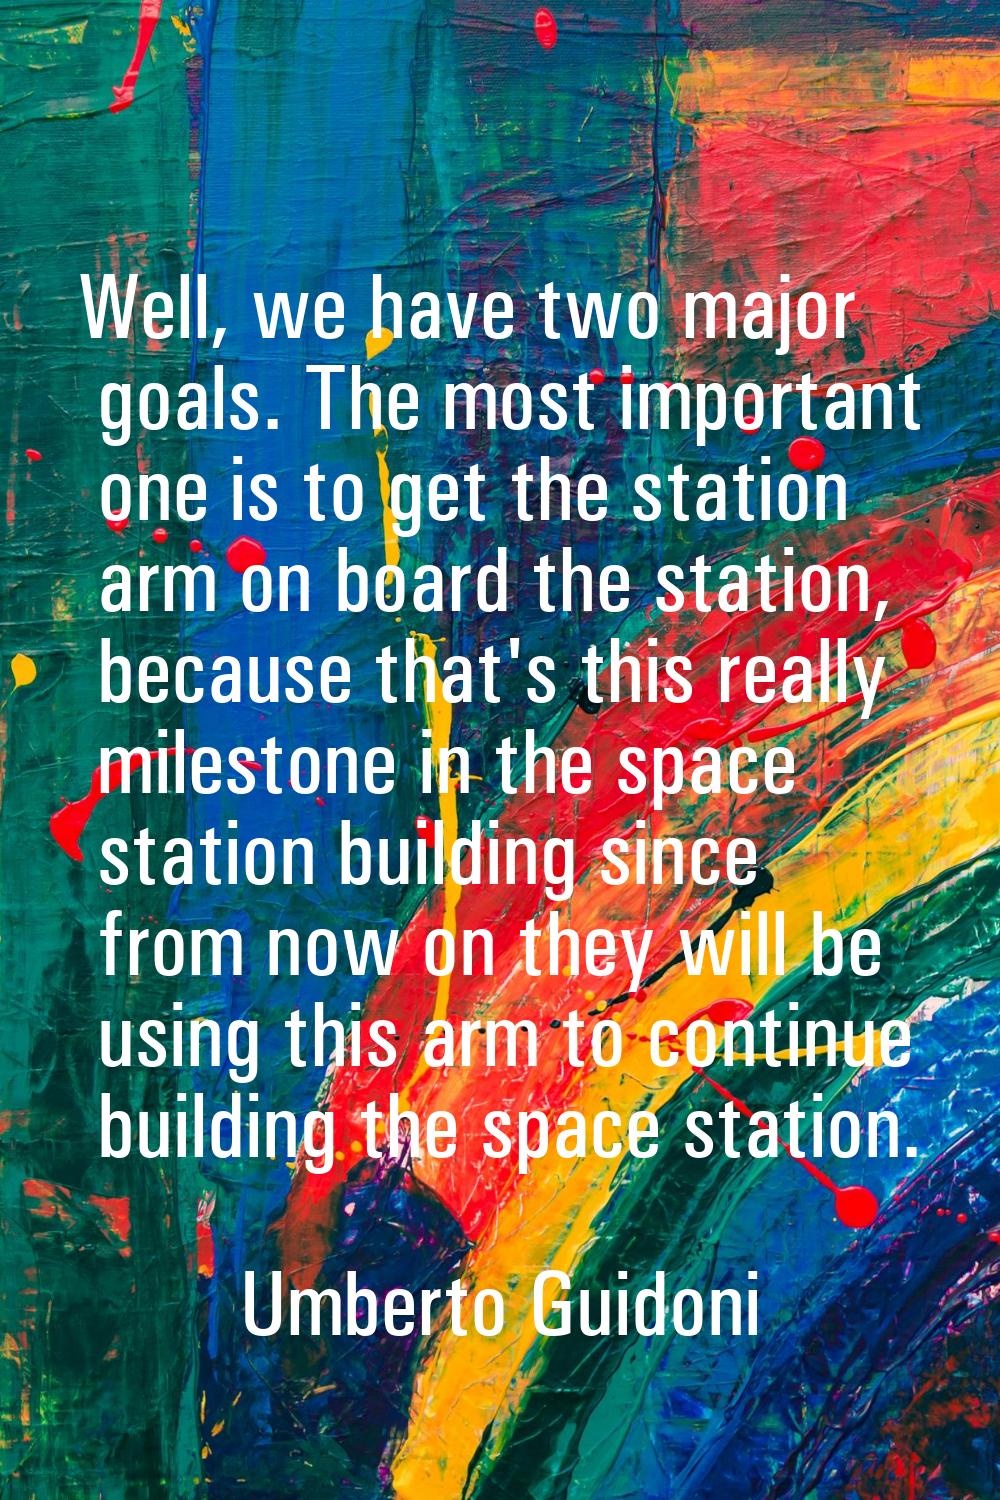 Well, we have two major goals. The most important one is to get the station arm on board the statio